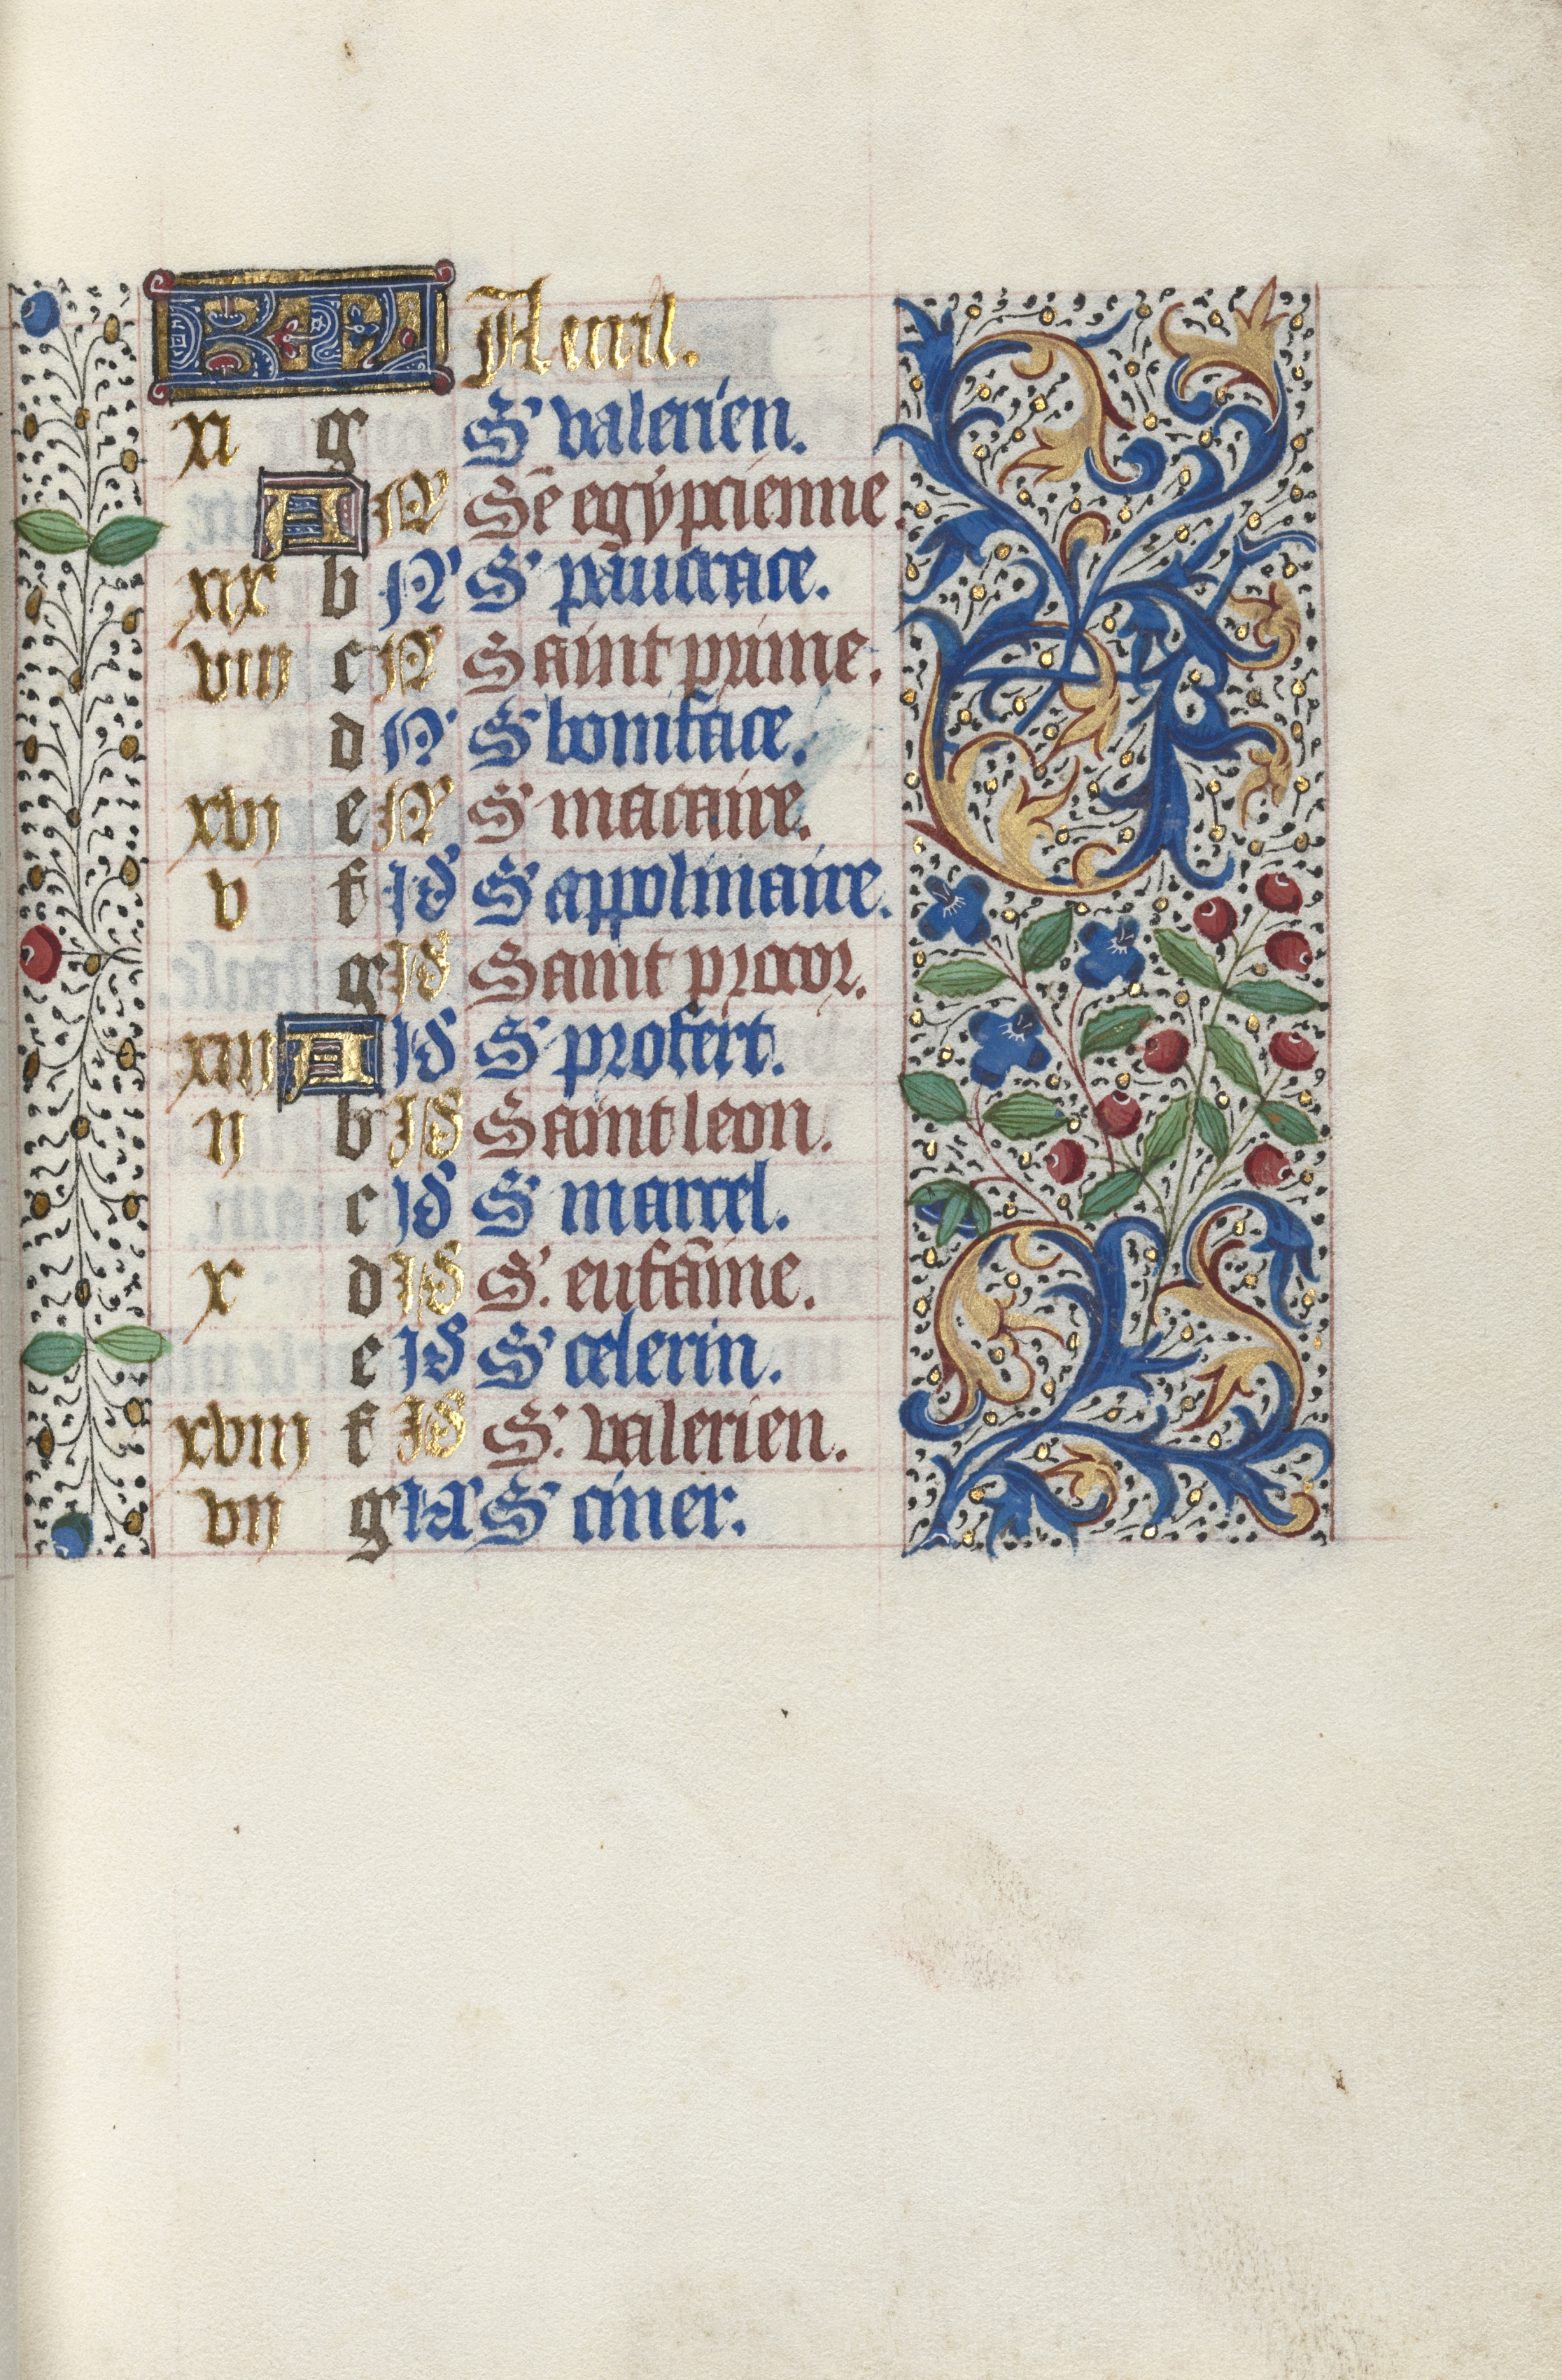 Book of Hours (Use of Rouen): fol. 4r, Calendar Page for April